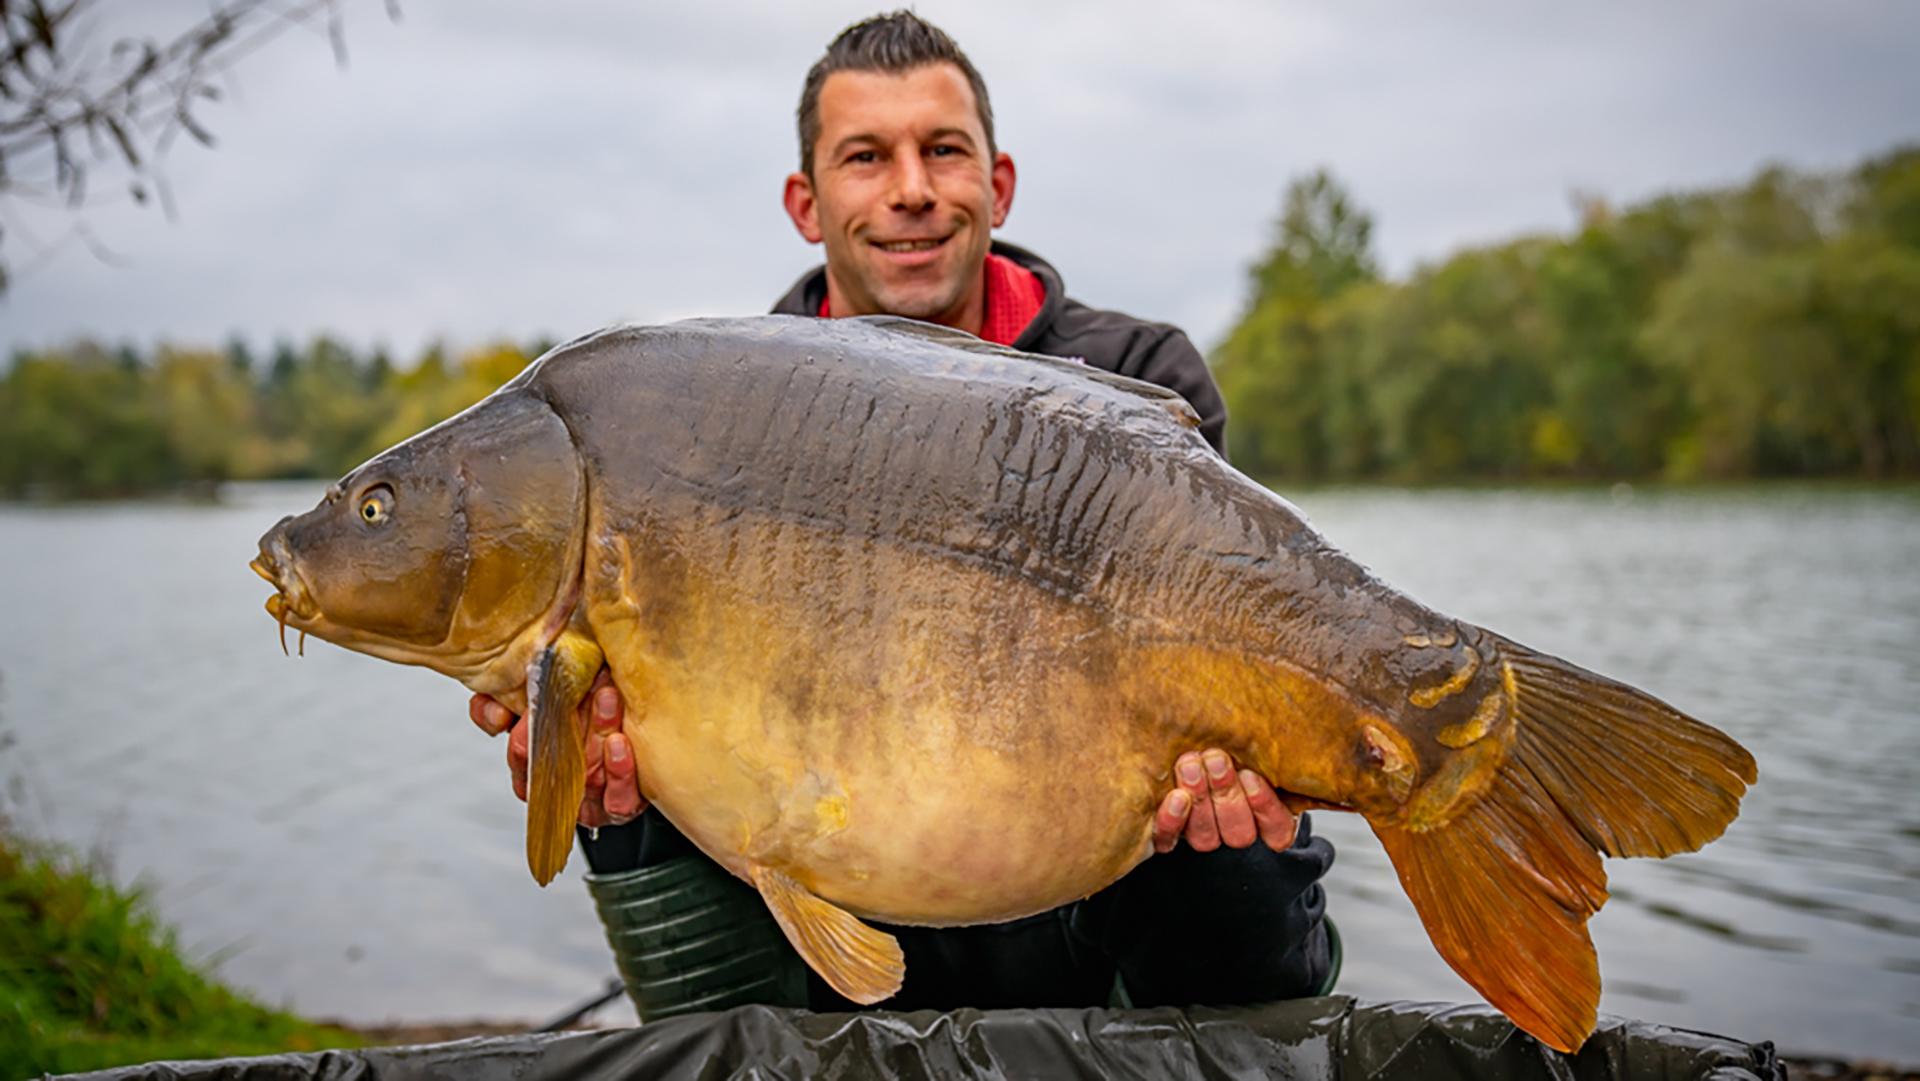 The Carpy Cast - 02-02-2022 - 3 Nettings and BIG CARP at the